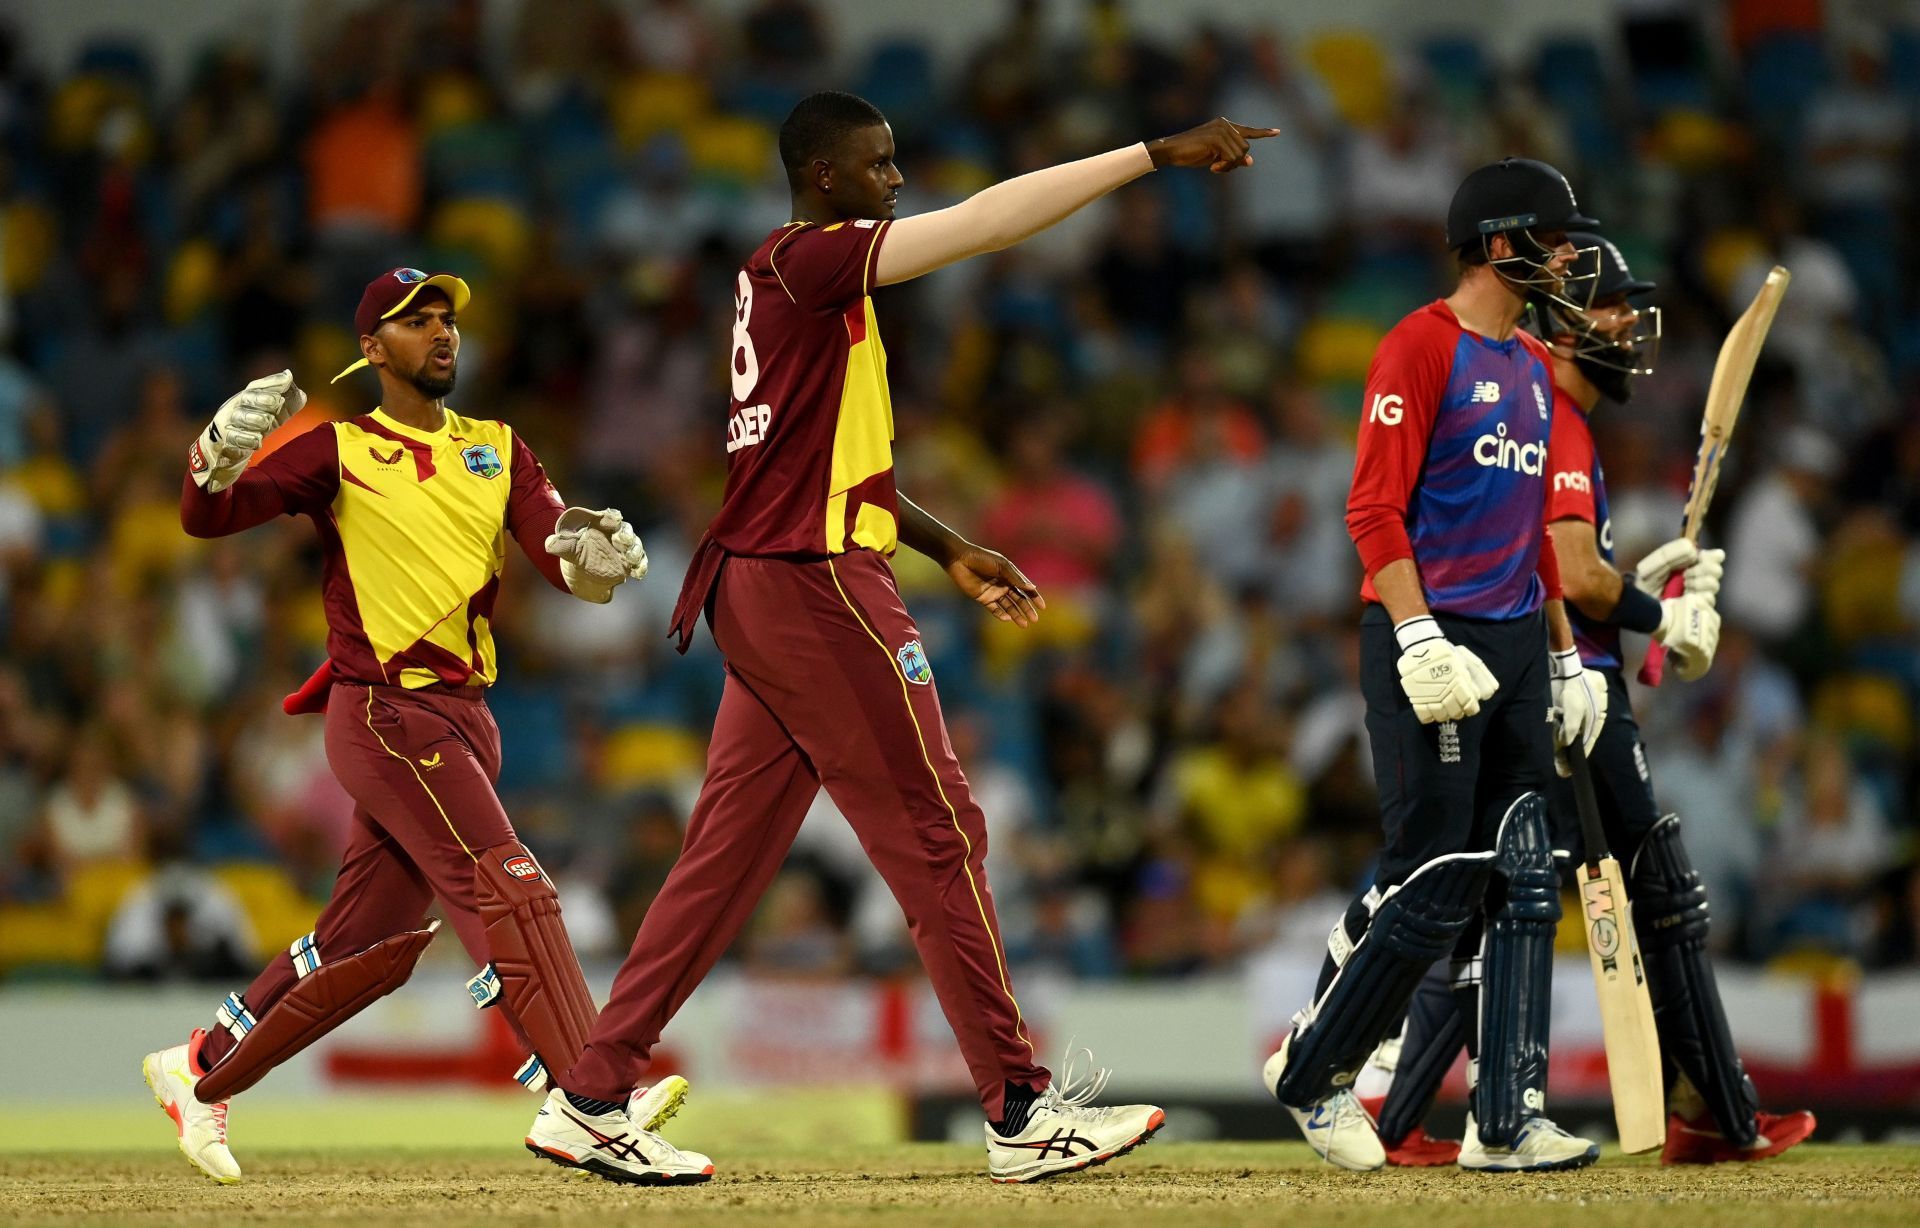 Jason Holder celebrates a wicket against England. Pic: Getty Images